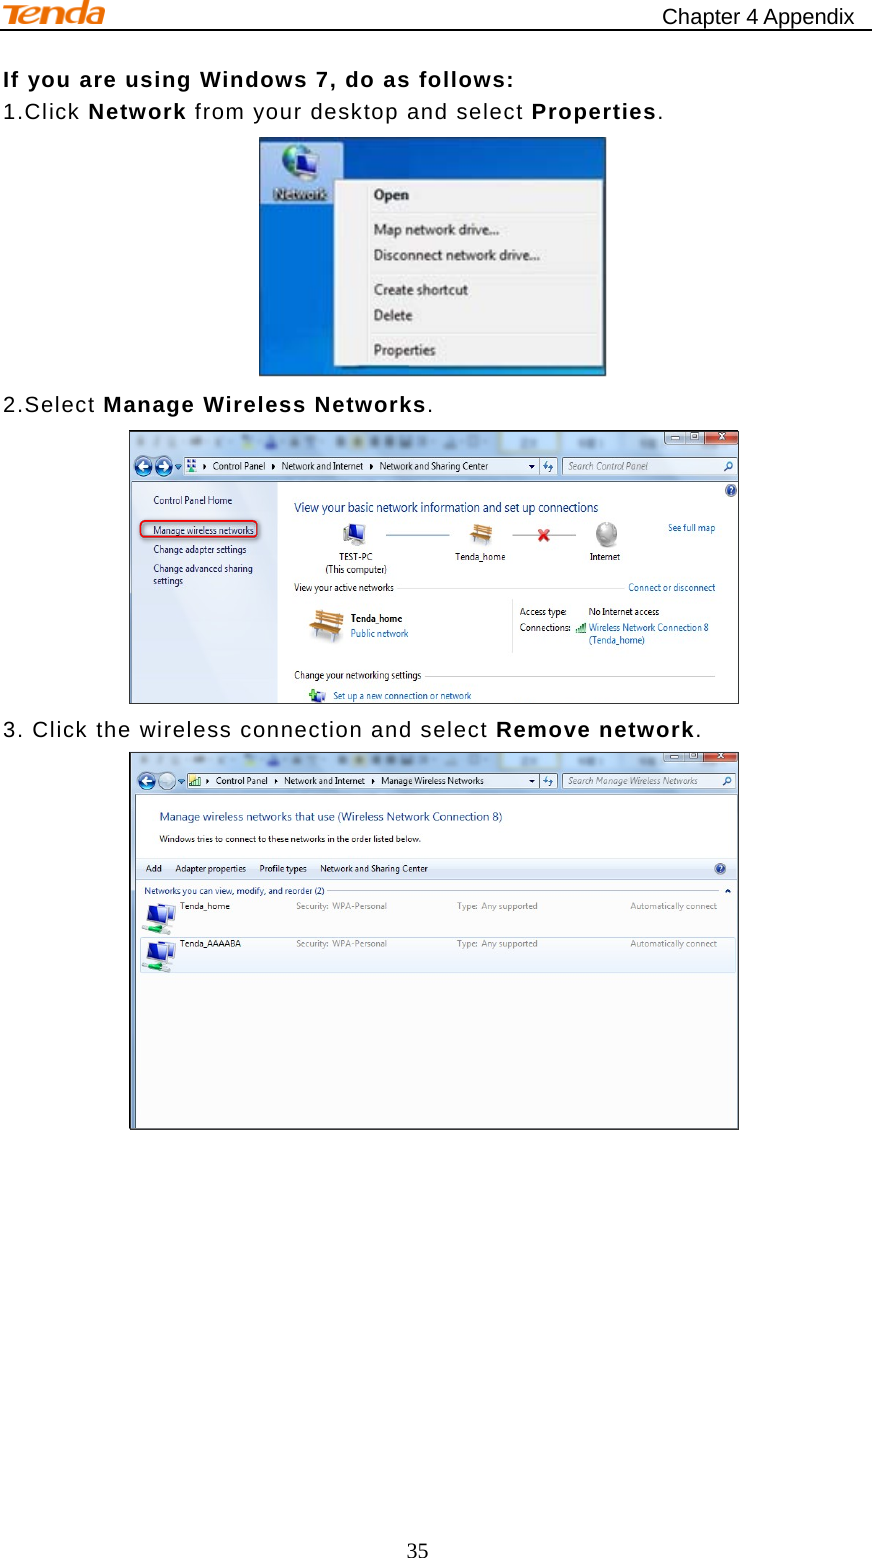                                                    Chapter 4 Appendix 35 If you are using Windows 7, do as follows: 1.Click Network from your desktop and select Properties.  2.Select Manage Wireless Networks.  3. Click the wireless connection and select Remove network.      